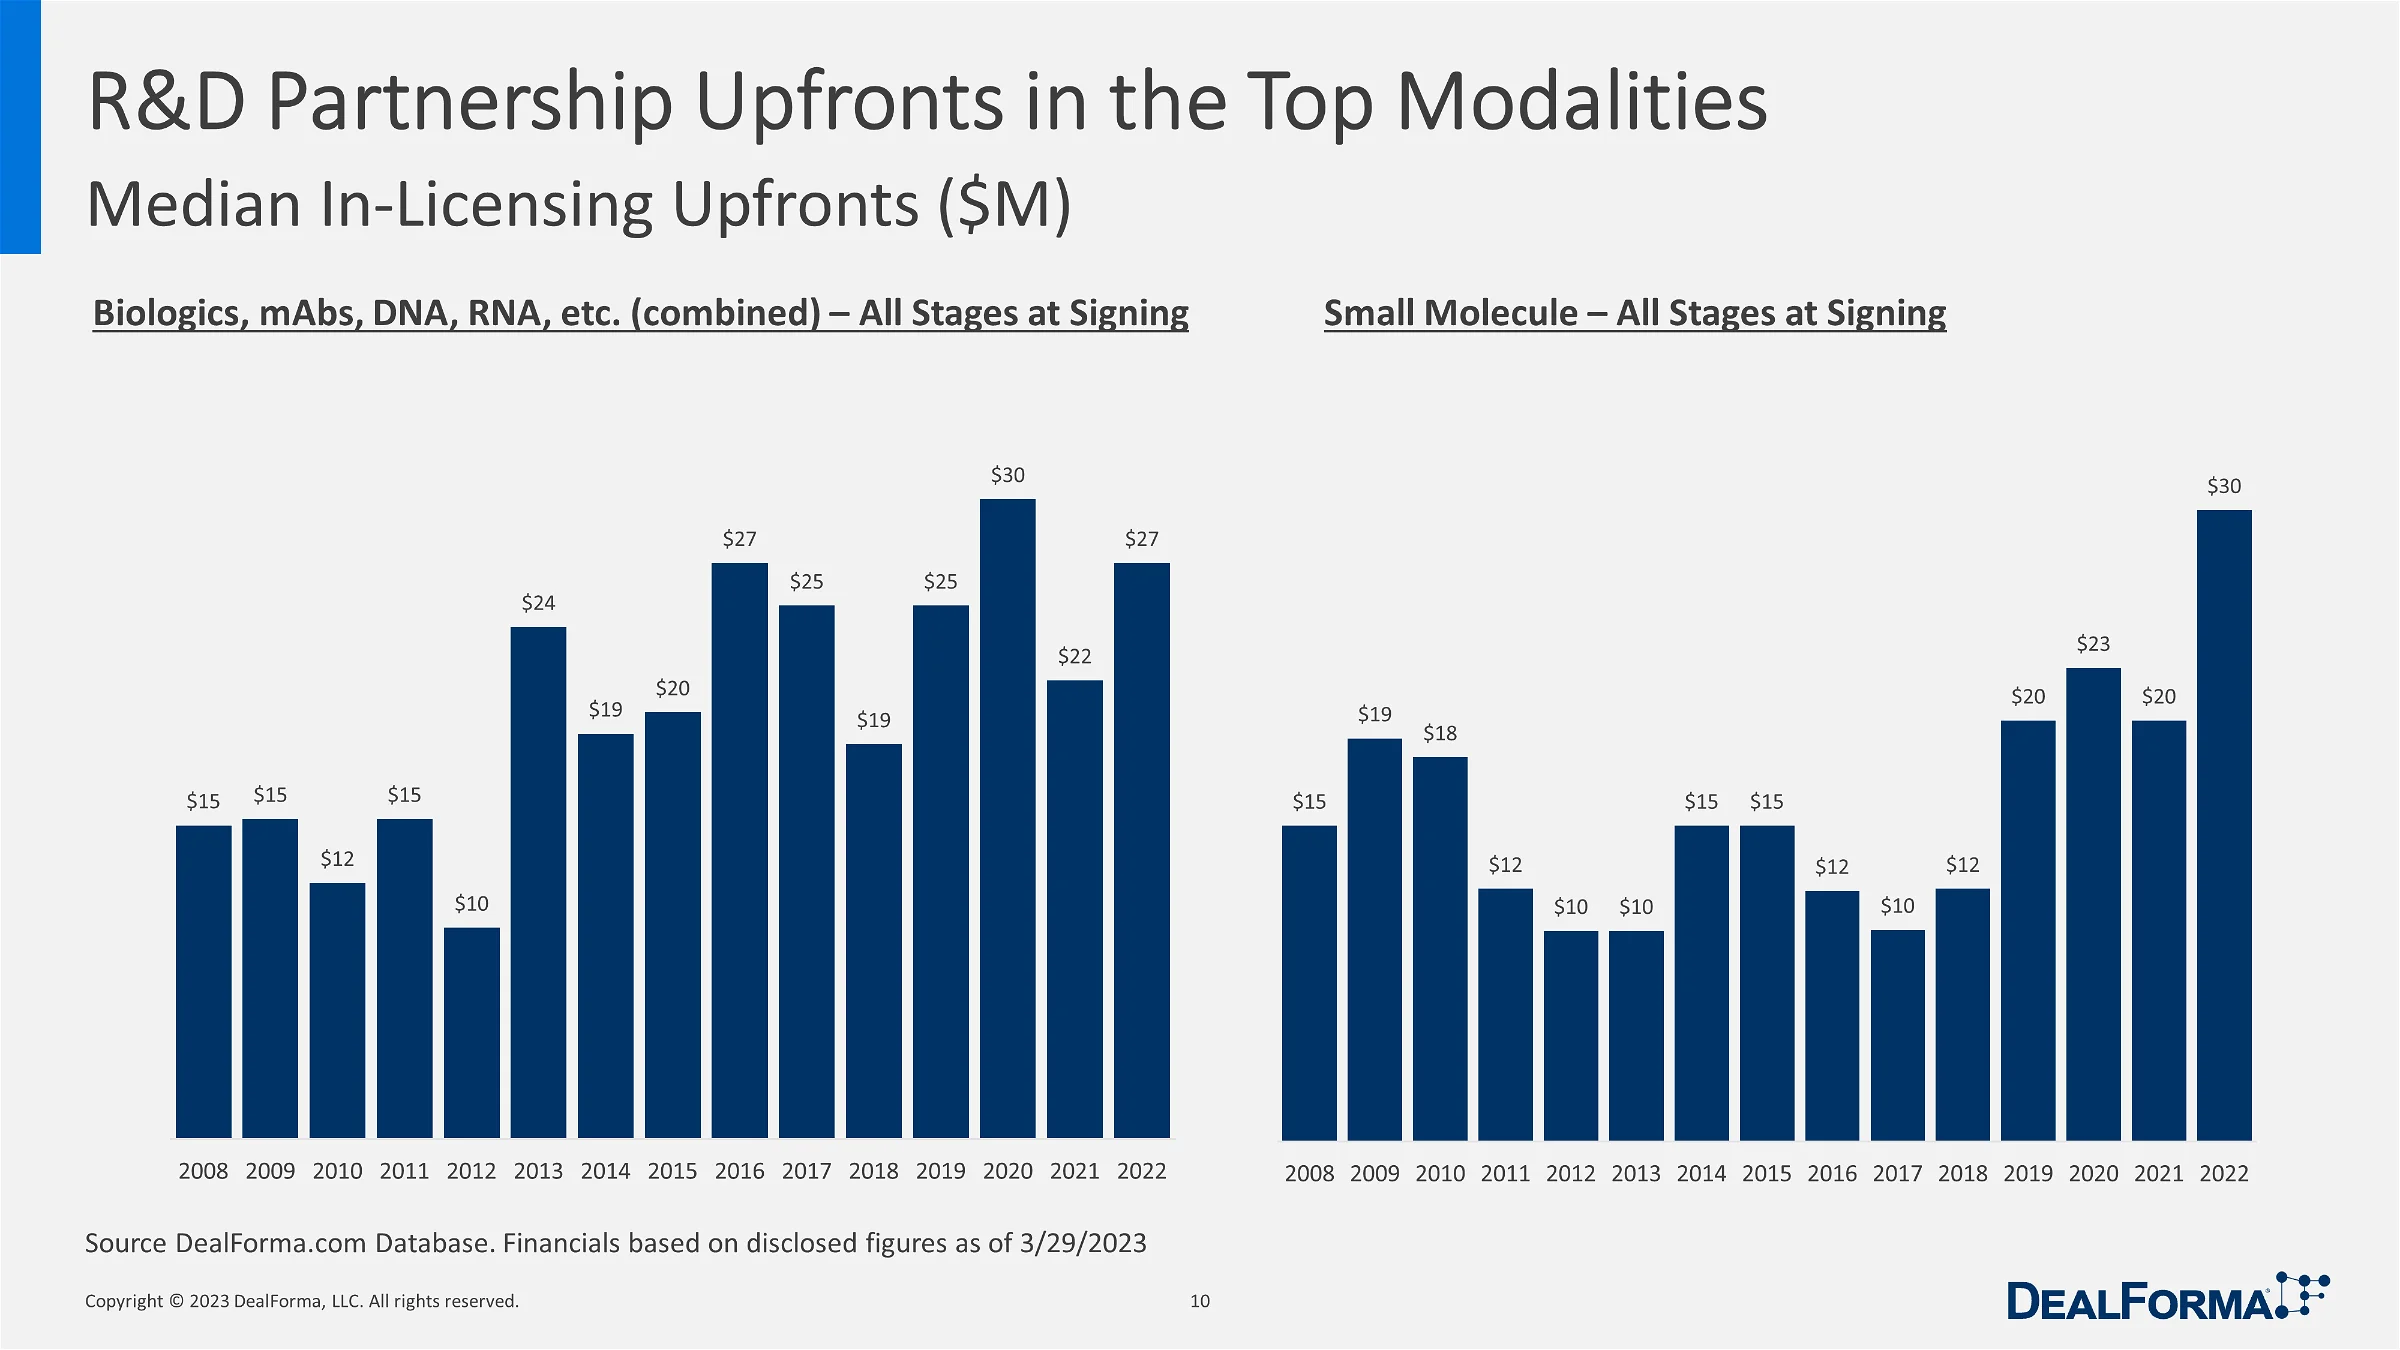 RD Partnership Upfronts in the Top Modalities 1